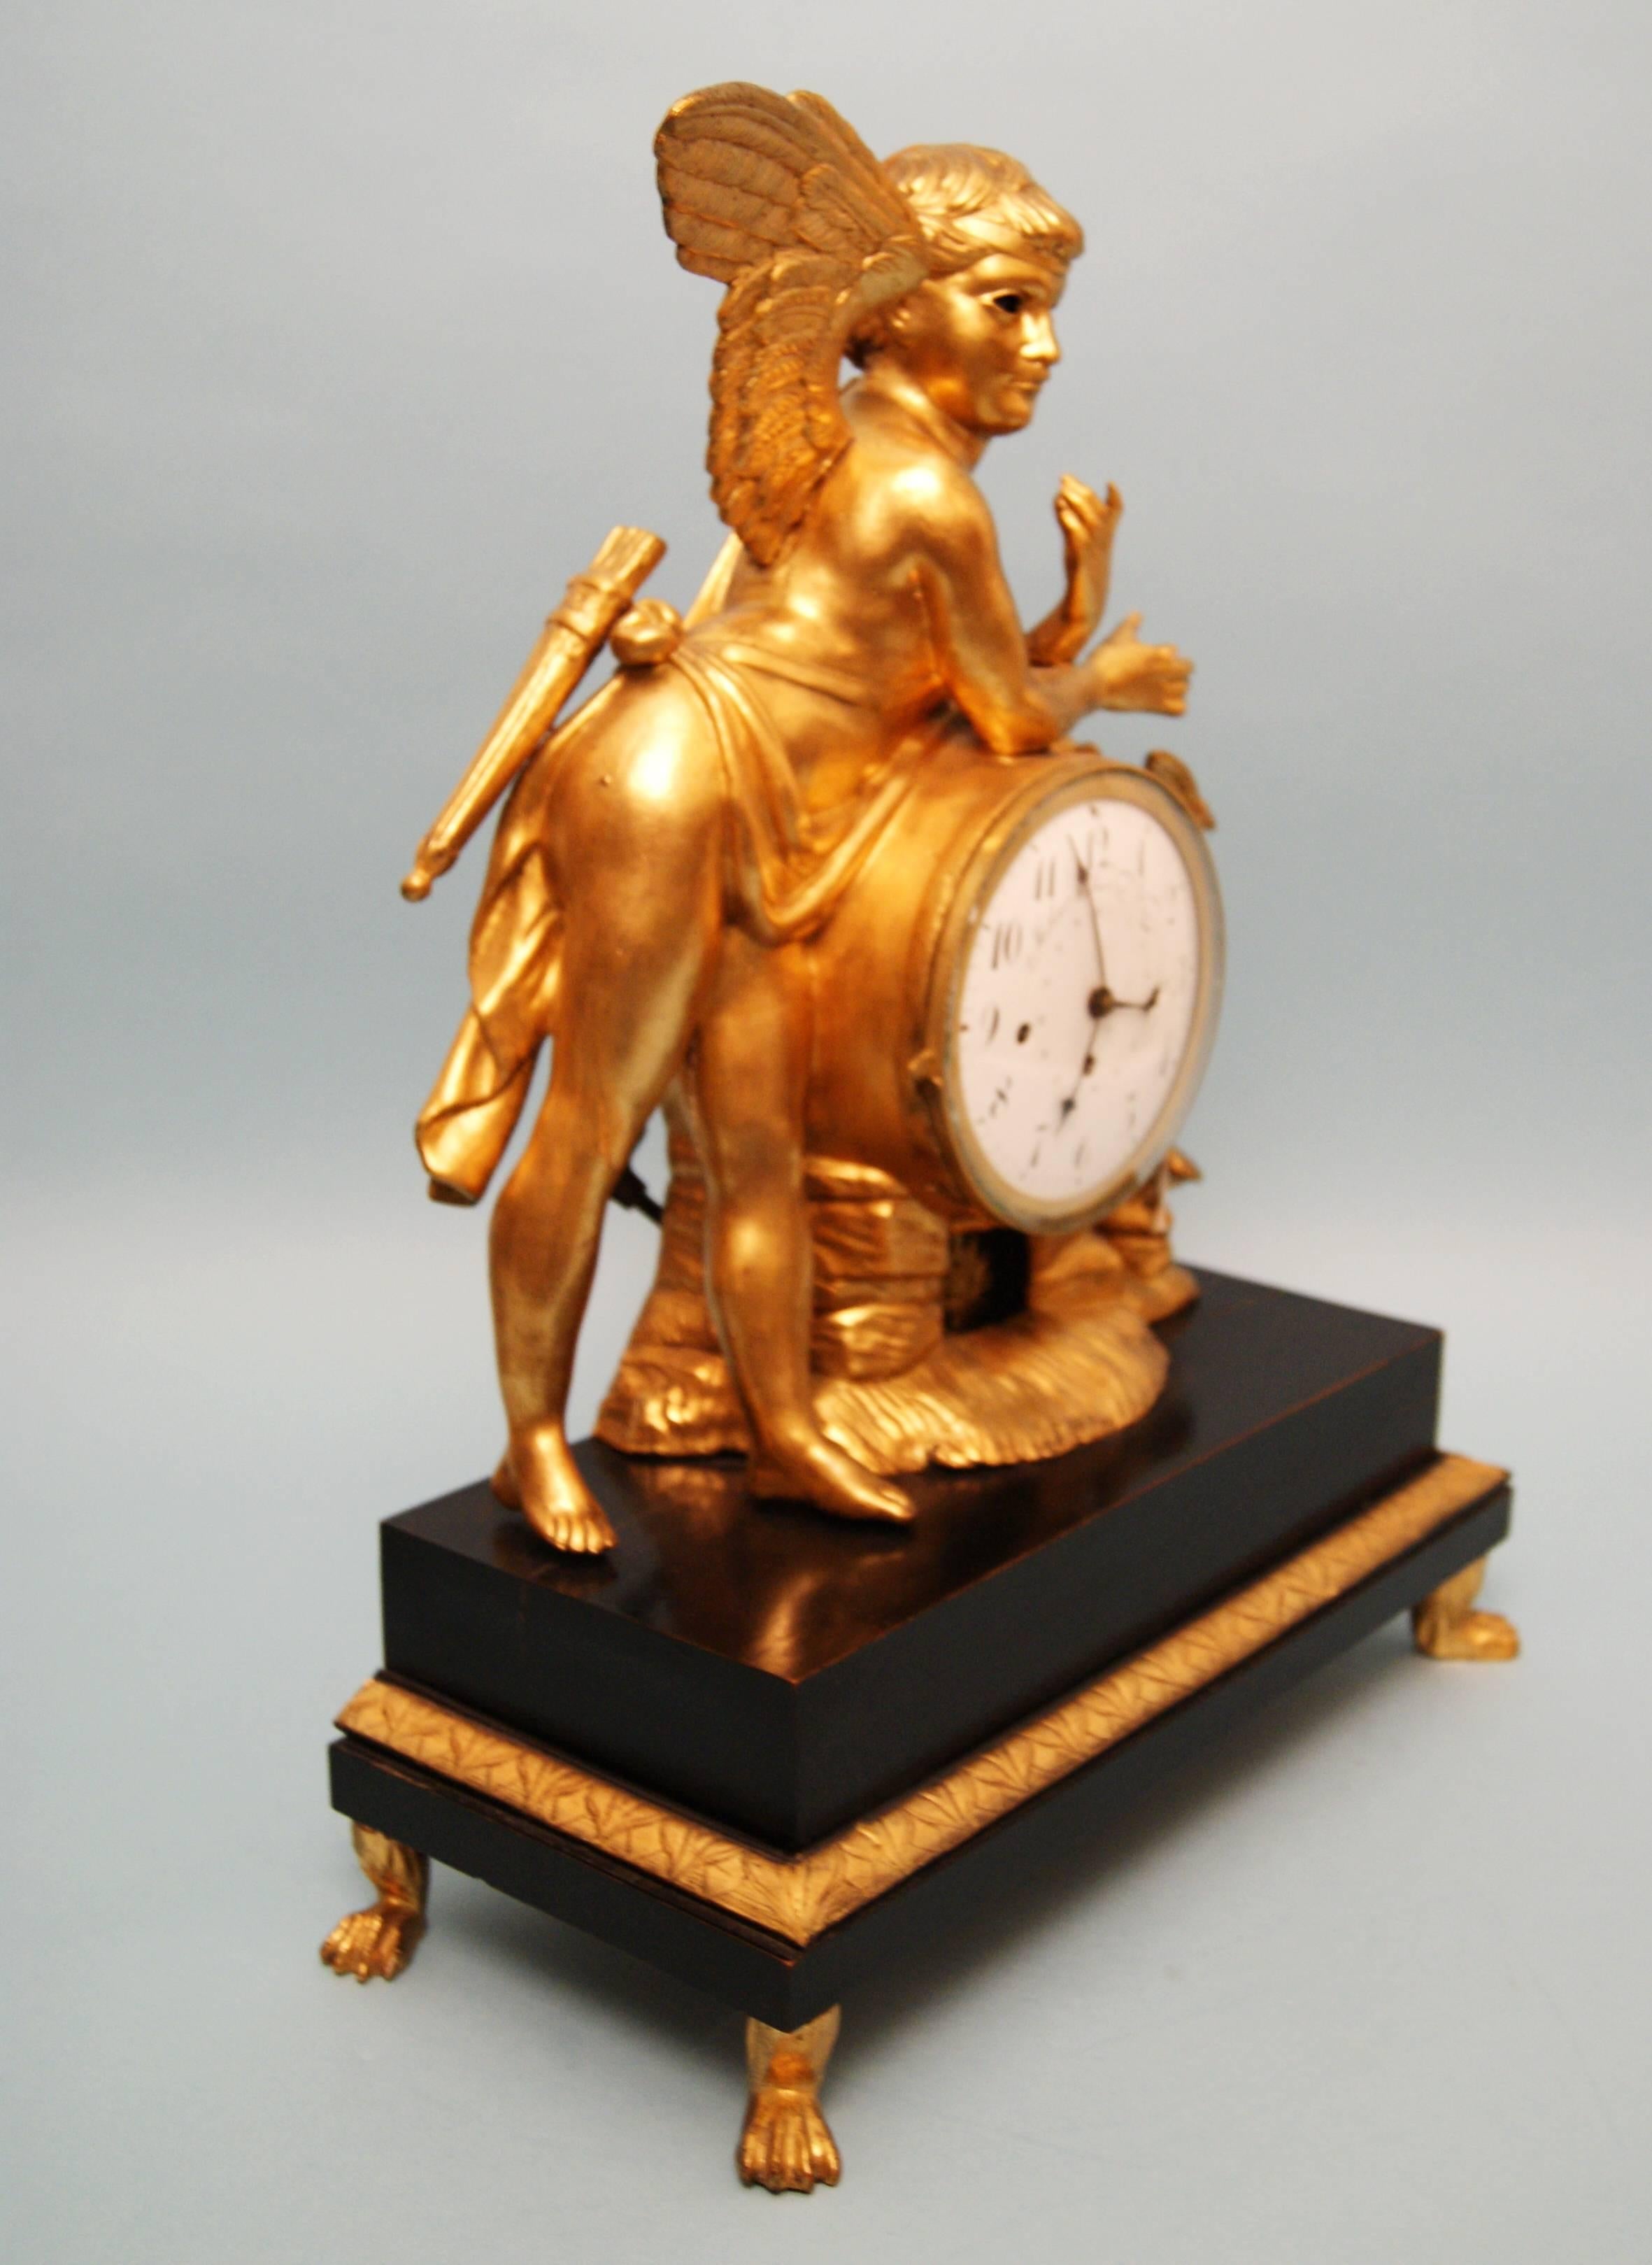 Subject:
Viennese gorgeous Mantel / mantle / table chiming clock, main parts made of wood. - Clock's wooden parts are gilt. - Explanation: Mantel clocks — or shelf clocks — are house clocks traditionally placed on the shelf, or mantel, above the